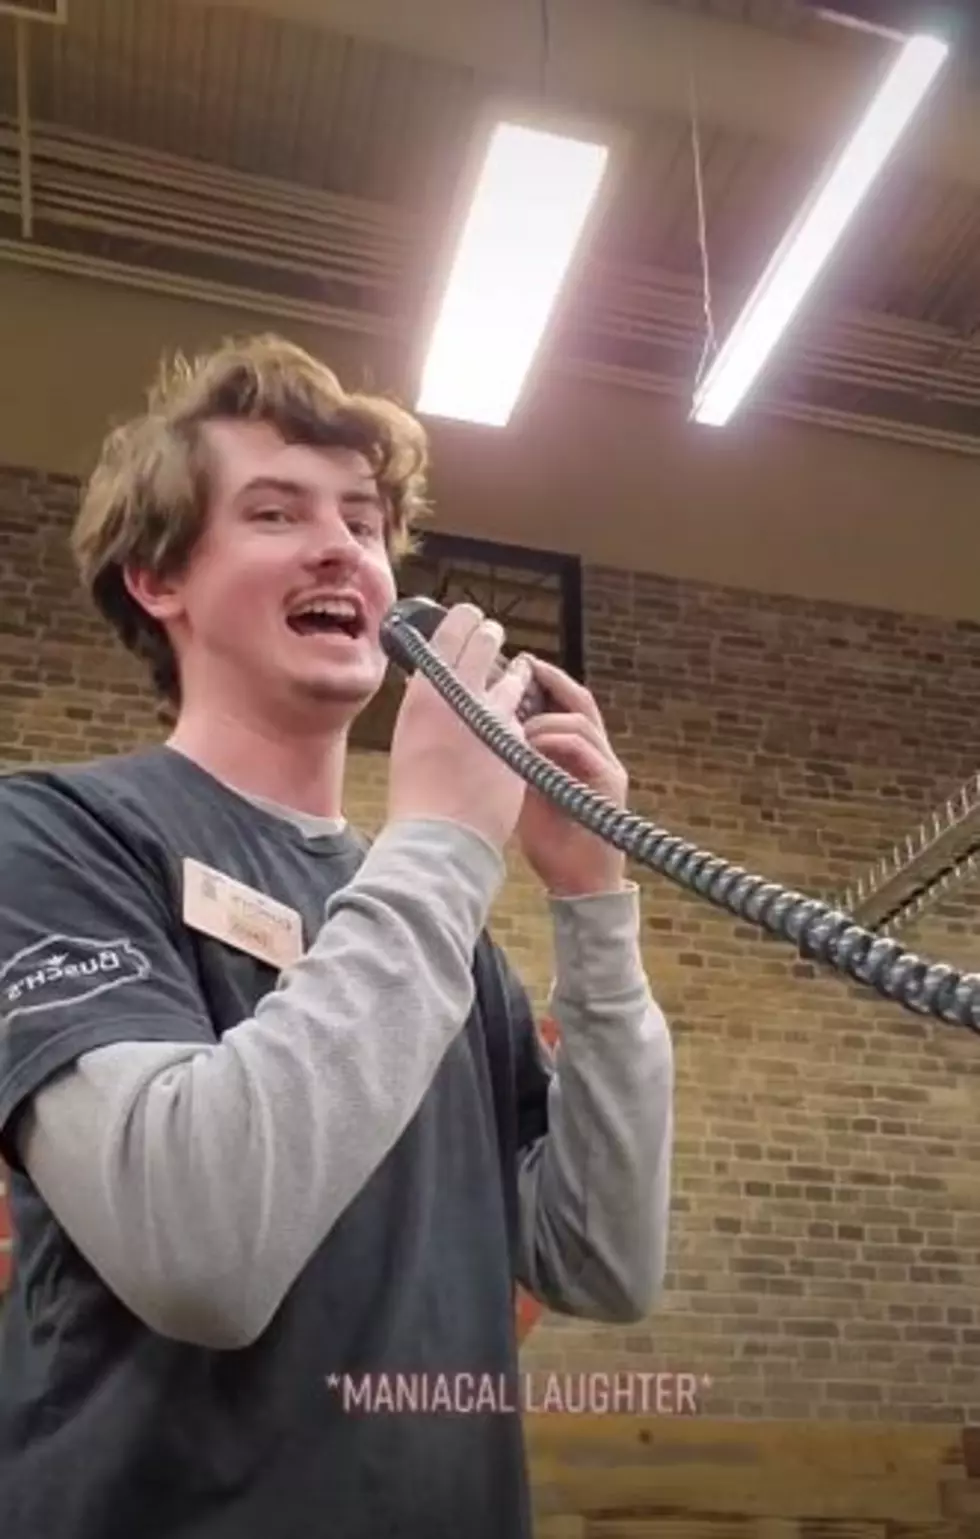 A Michigan Cashier’s Closing Time Announcement Goes Crazy Viral